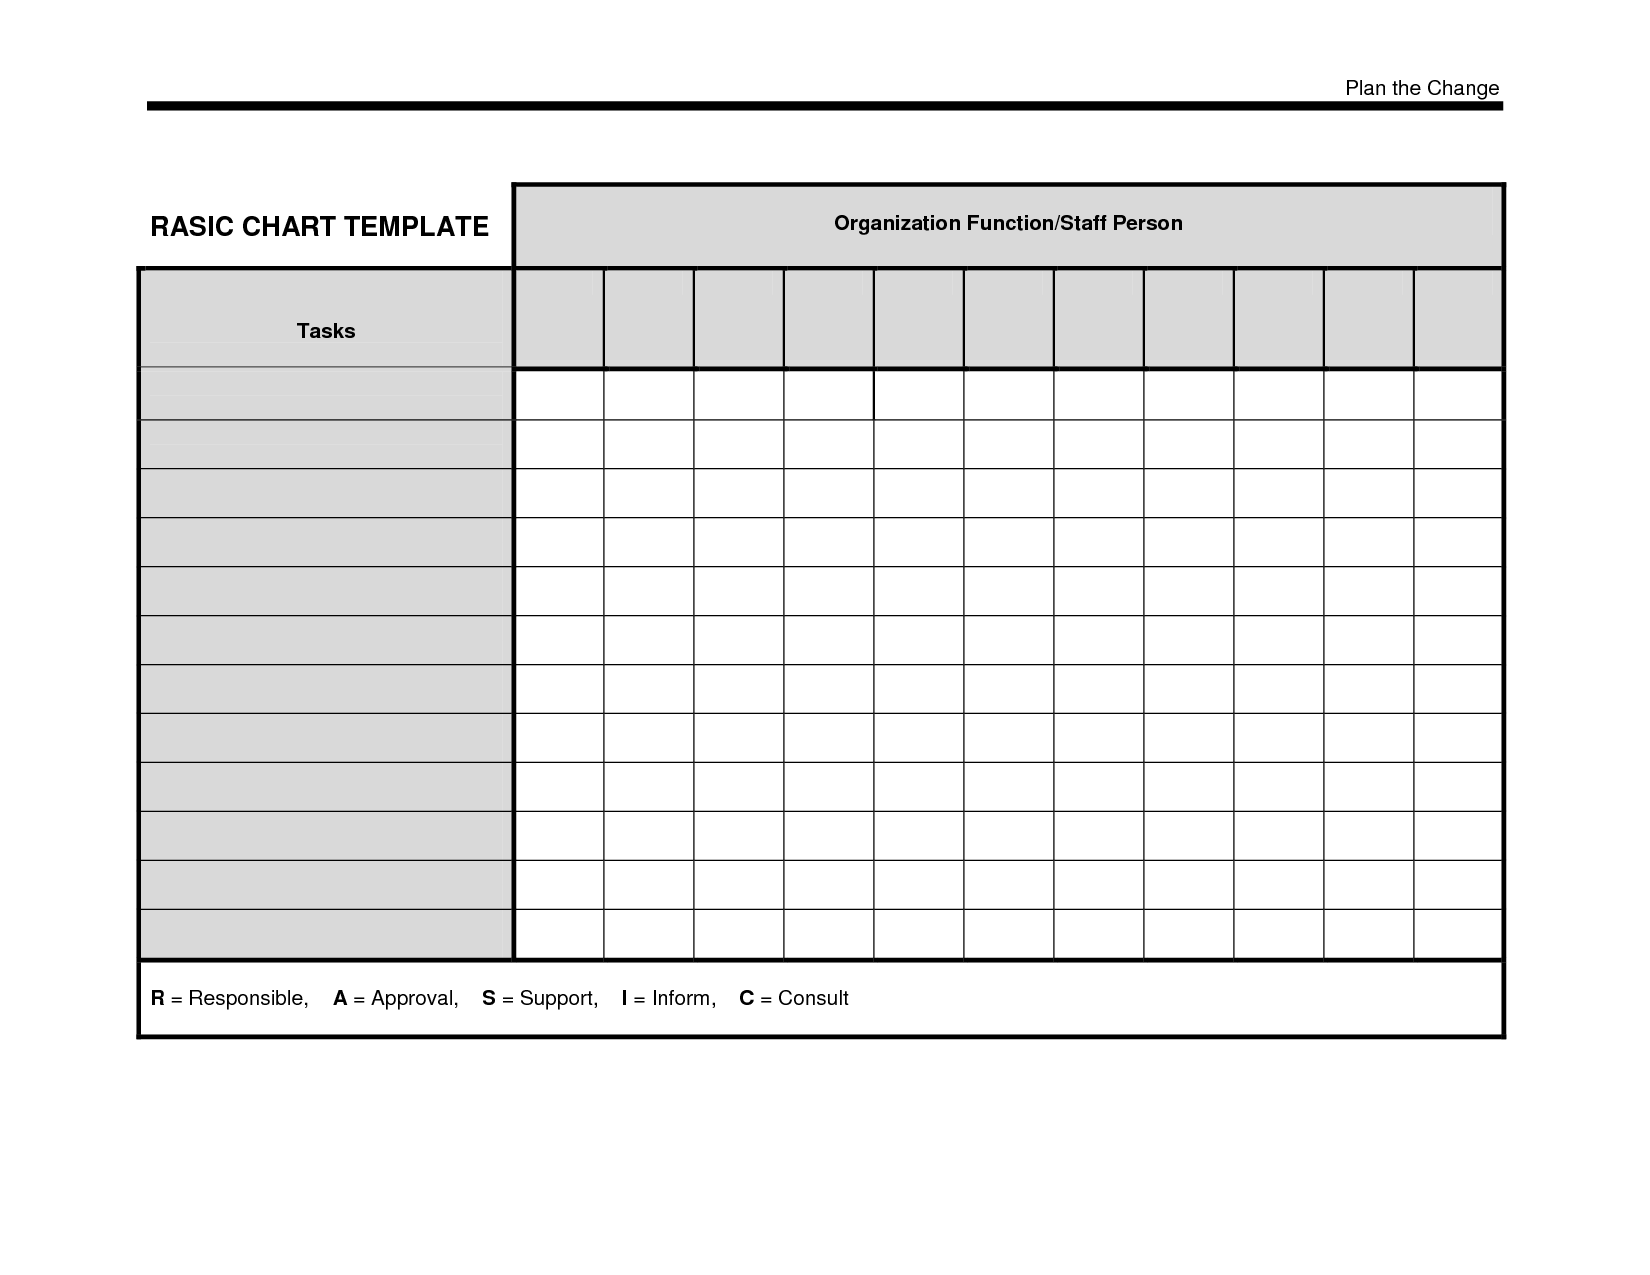 5-best-images-of-free-printable-organizational-templates-free-excel-organizational-chart